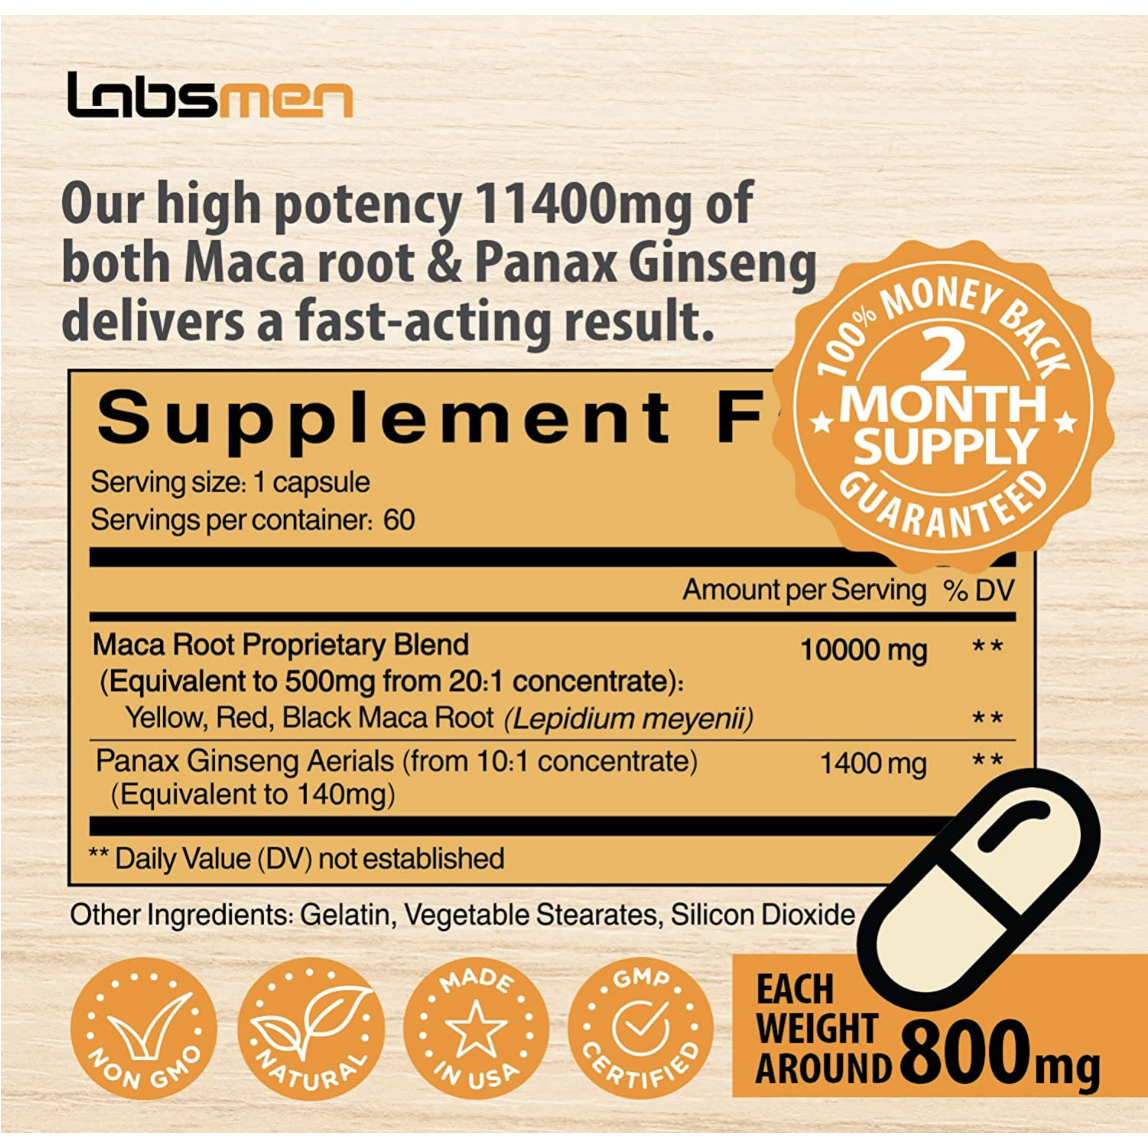 maca-root-capsules-for-women for cheap